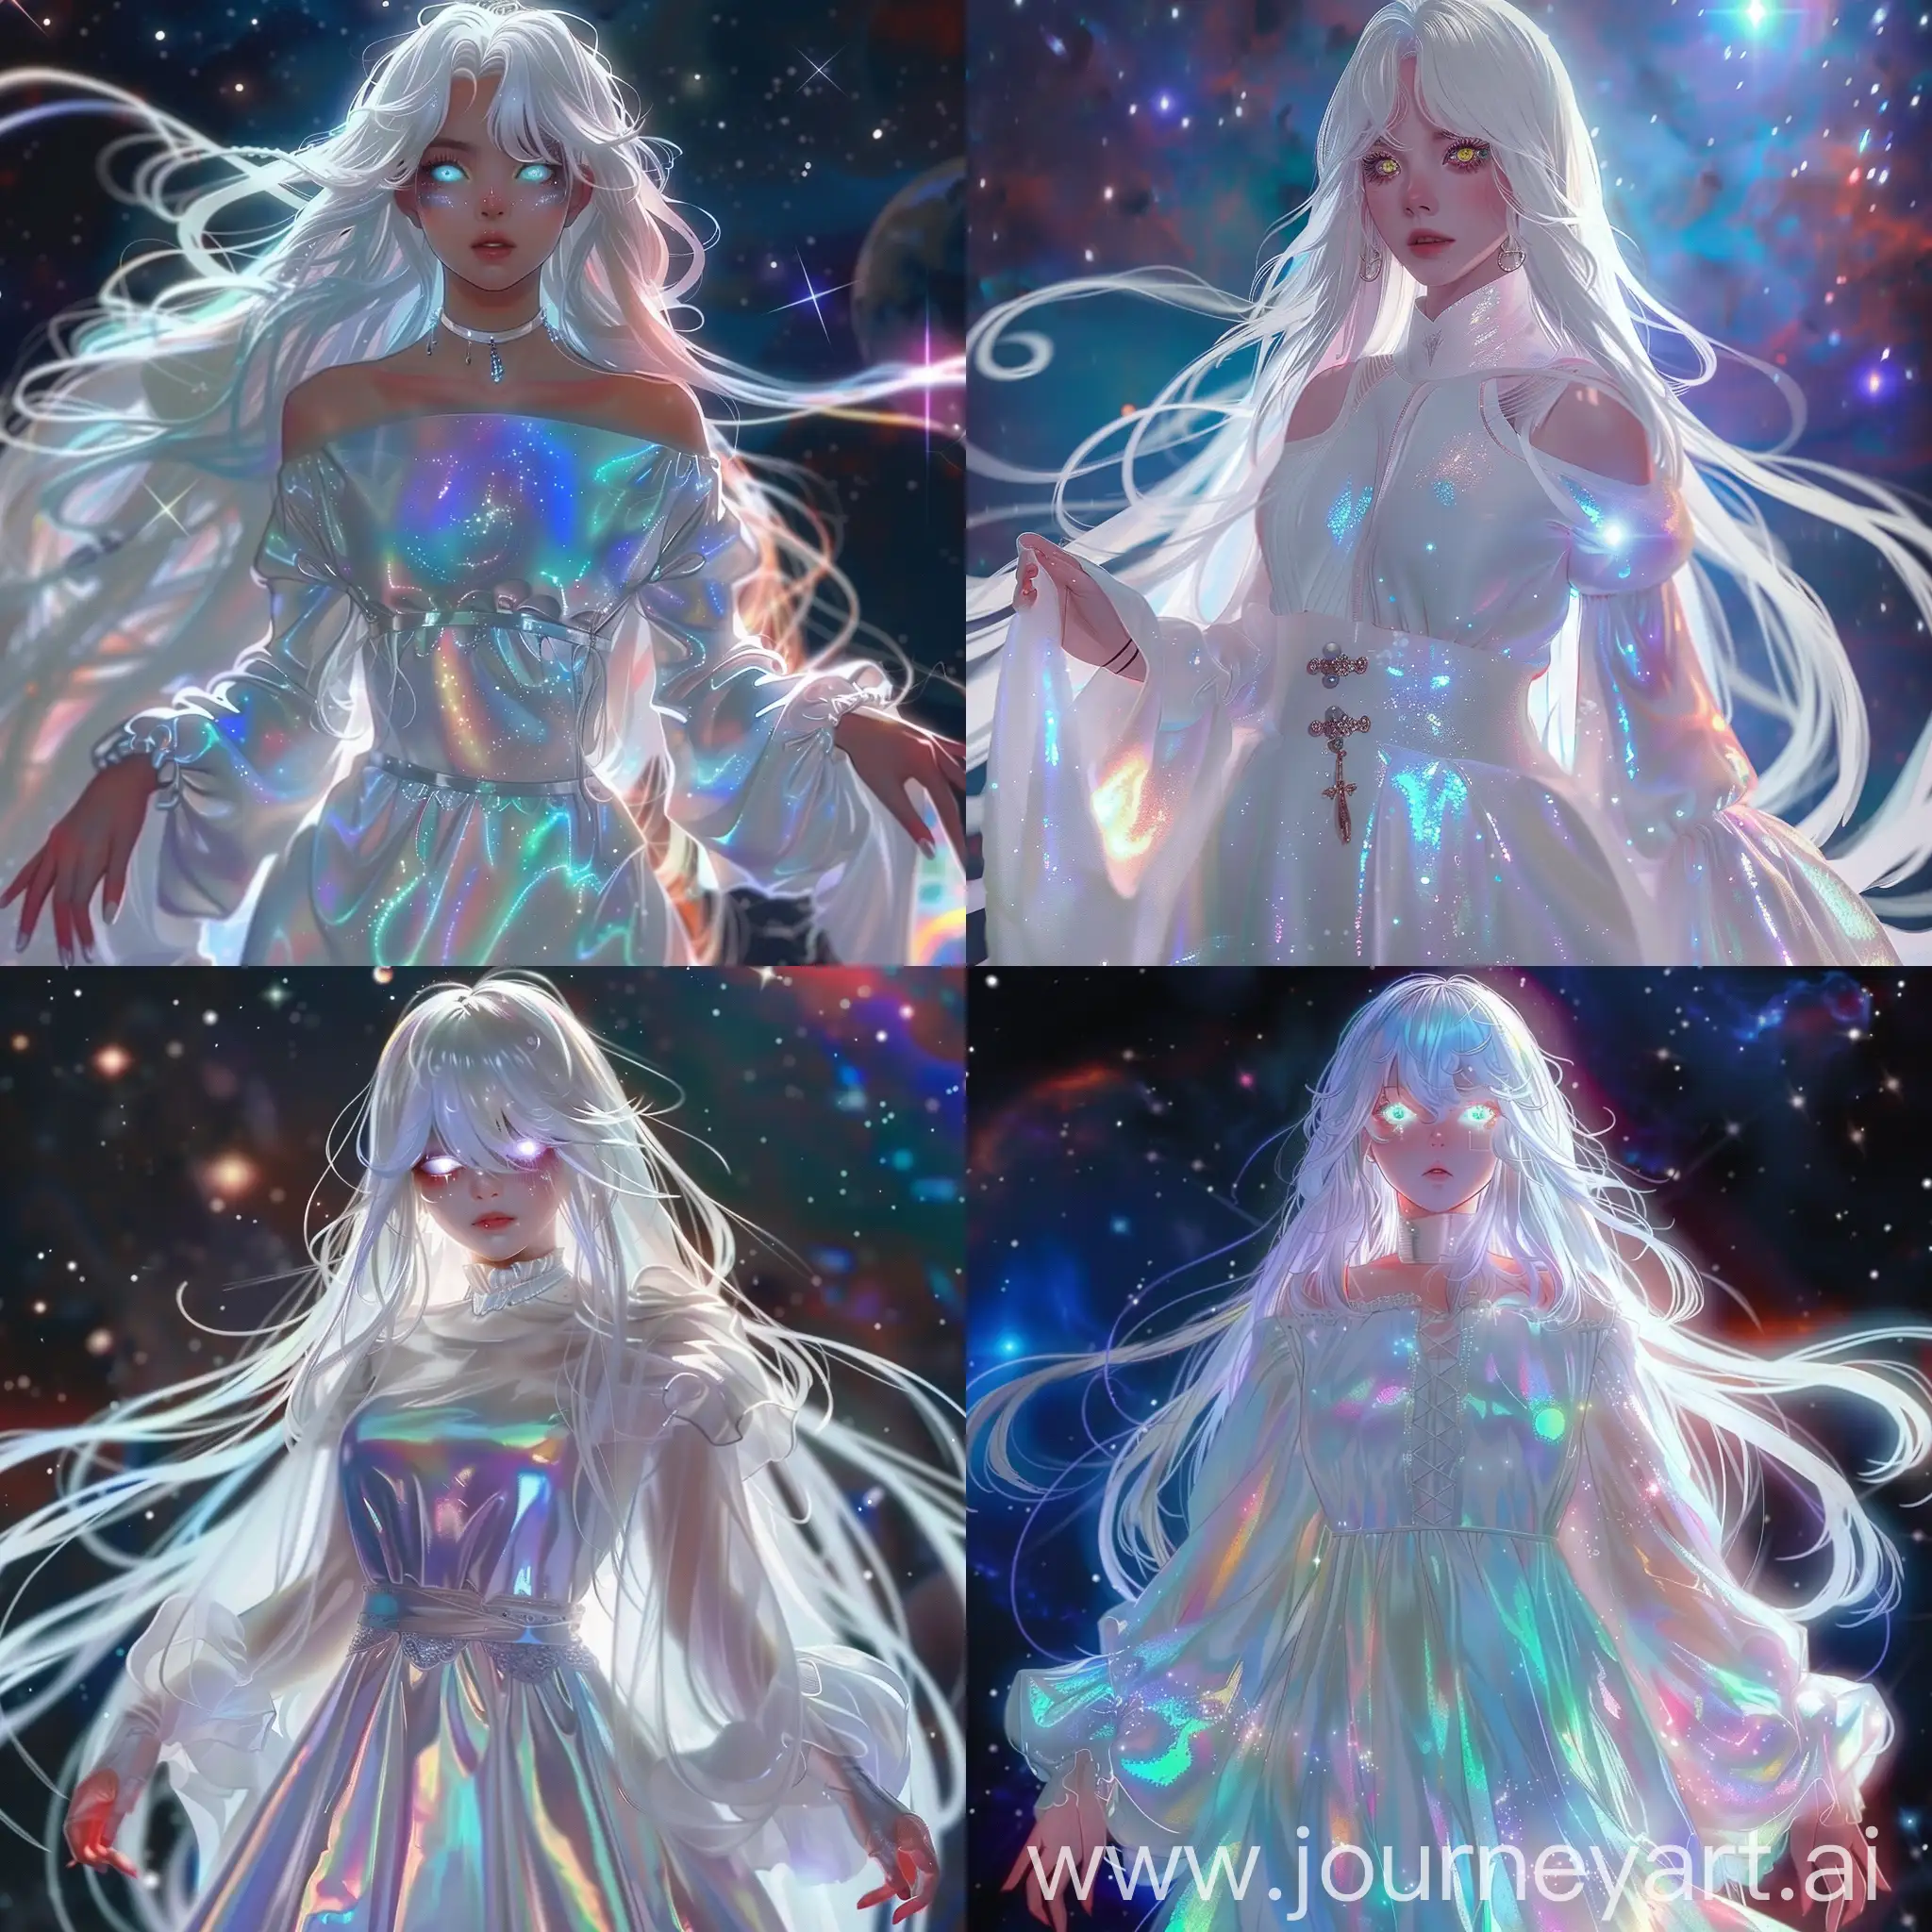 Lady with long white hair wearing an iridescent white dress with sleeves, cosmic environment, glowing eyes, Moe style girl 